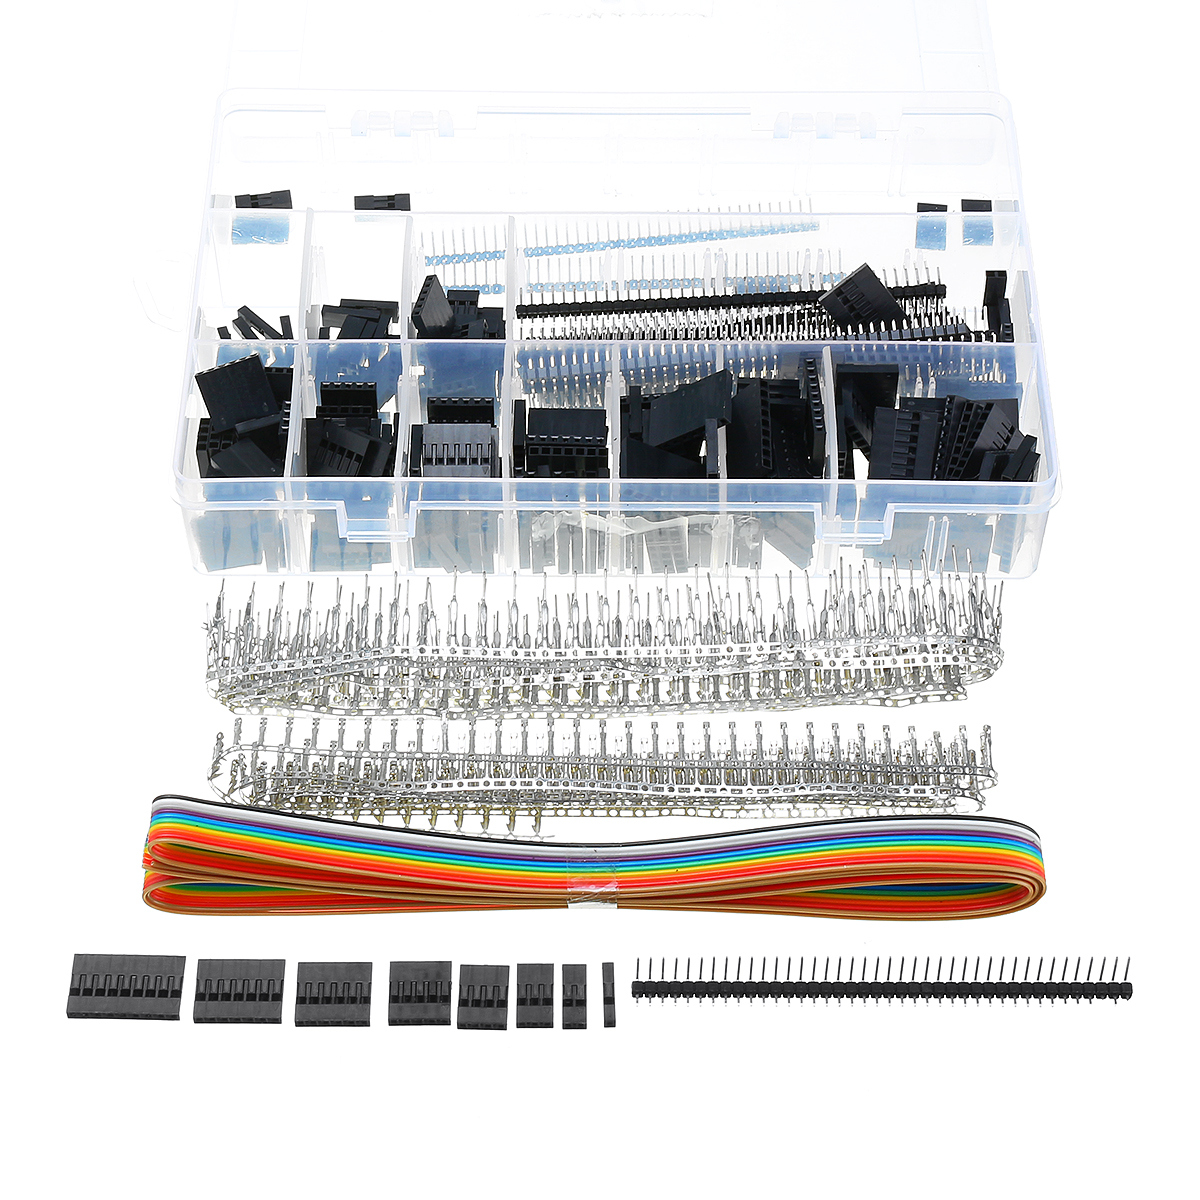 

635Pcs Dupont Connector Housing Male/Female Pin Connector 40 Pin 2.54mm Pitch Pin Headers and 10 Wire Rainbow Color Flat Ribbon IDC Wire Cable Assortment Kit